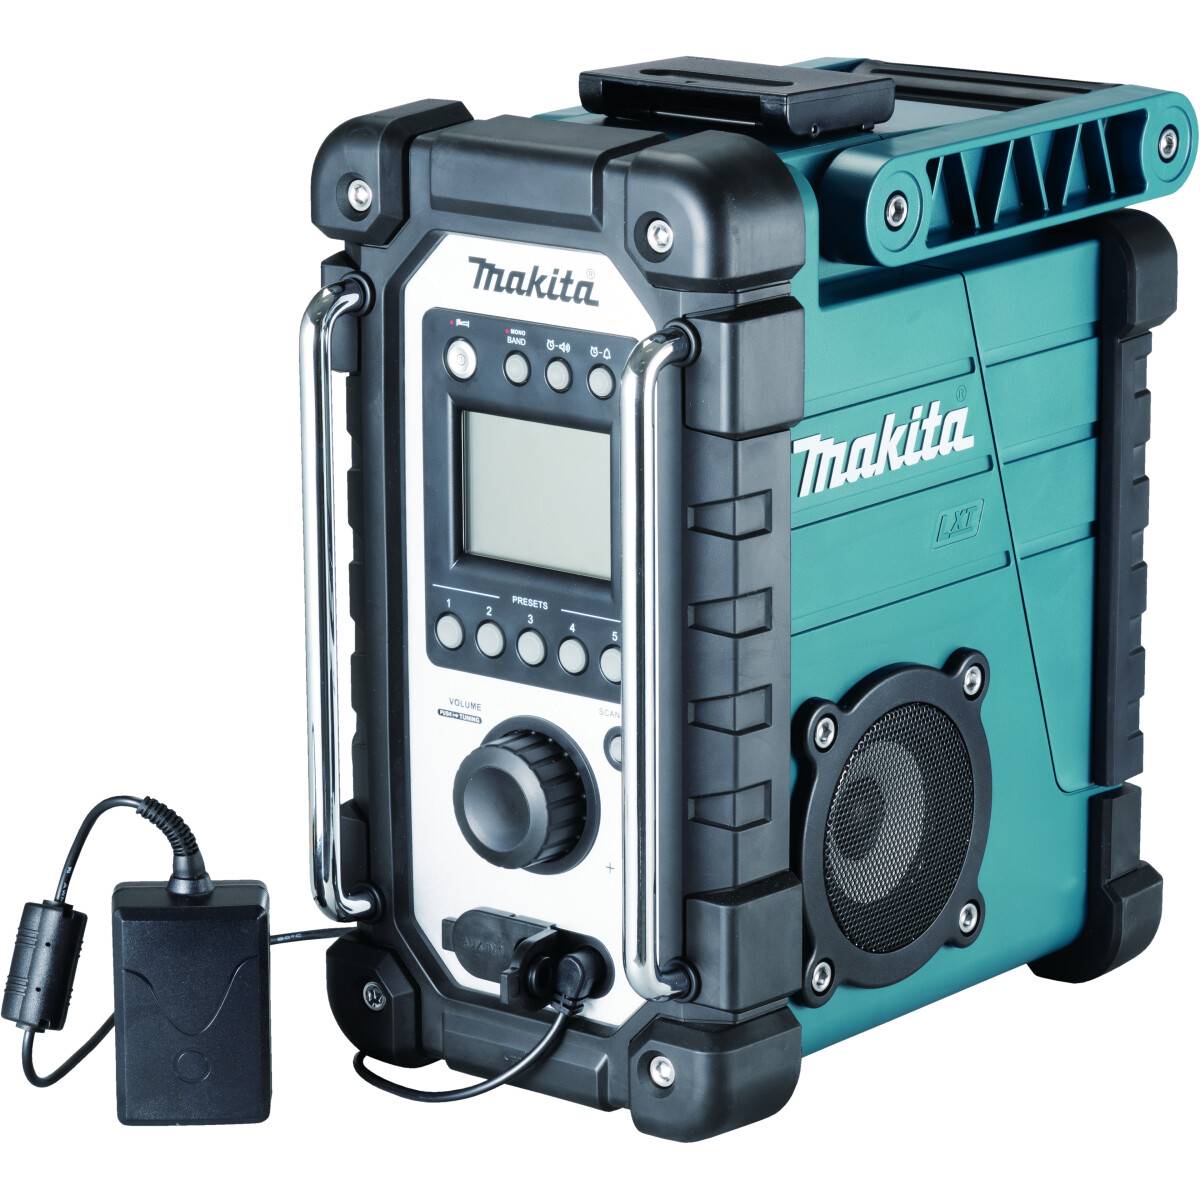 Makita MR003GX001 Olive Green 12-40v (CXT, LXT, XGT) or Mains DAB/DAB+  Jobsite Radio with 1x 18V - 3.0Ah Battery and Charger from Lawson HIS